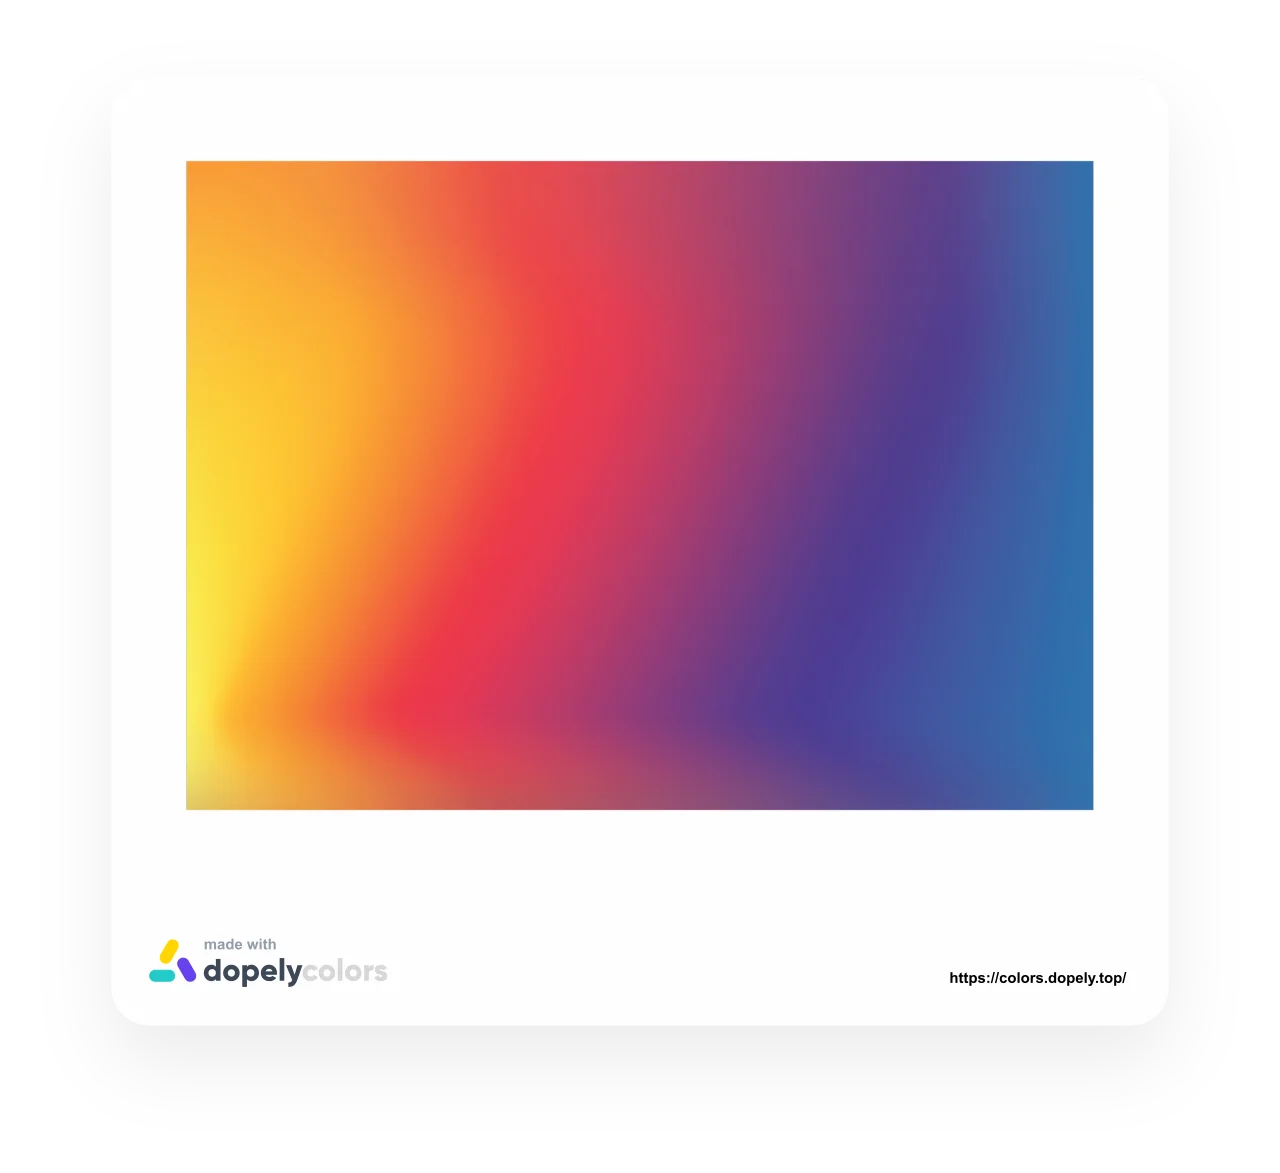 a mesh gradient contains yellow, orange, red, purple and blue with adobe illustrator